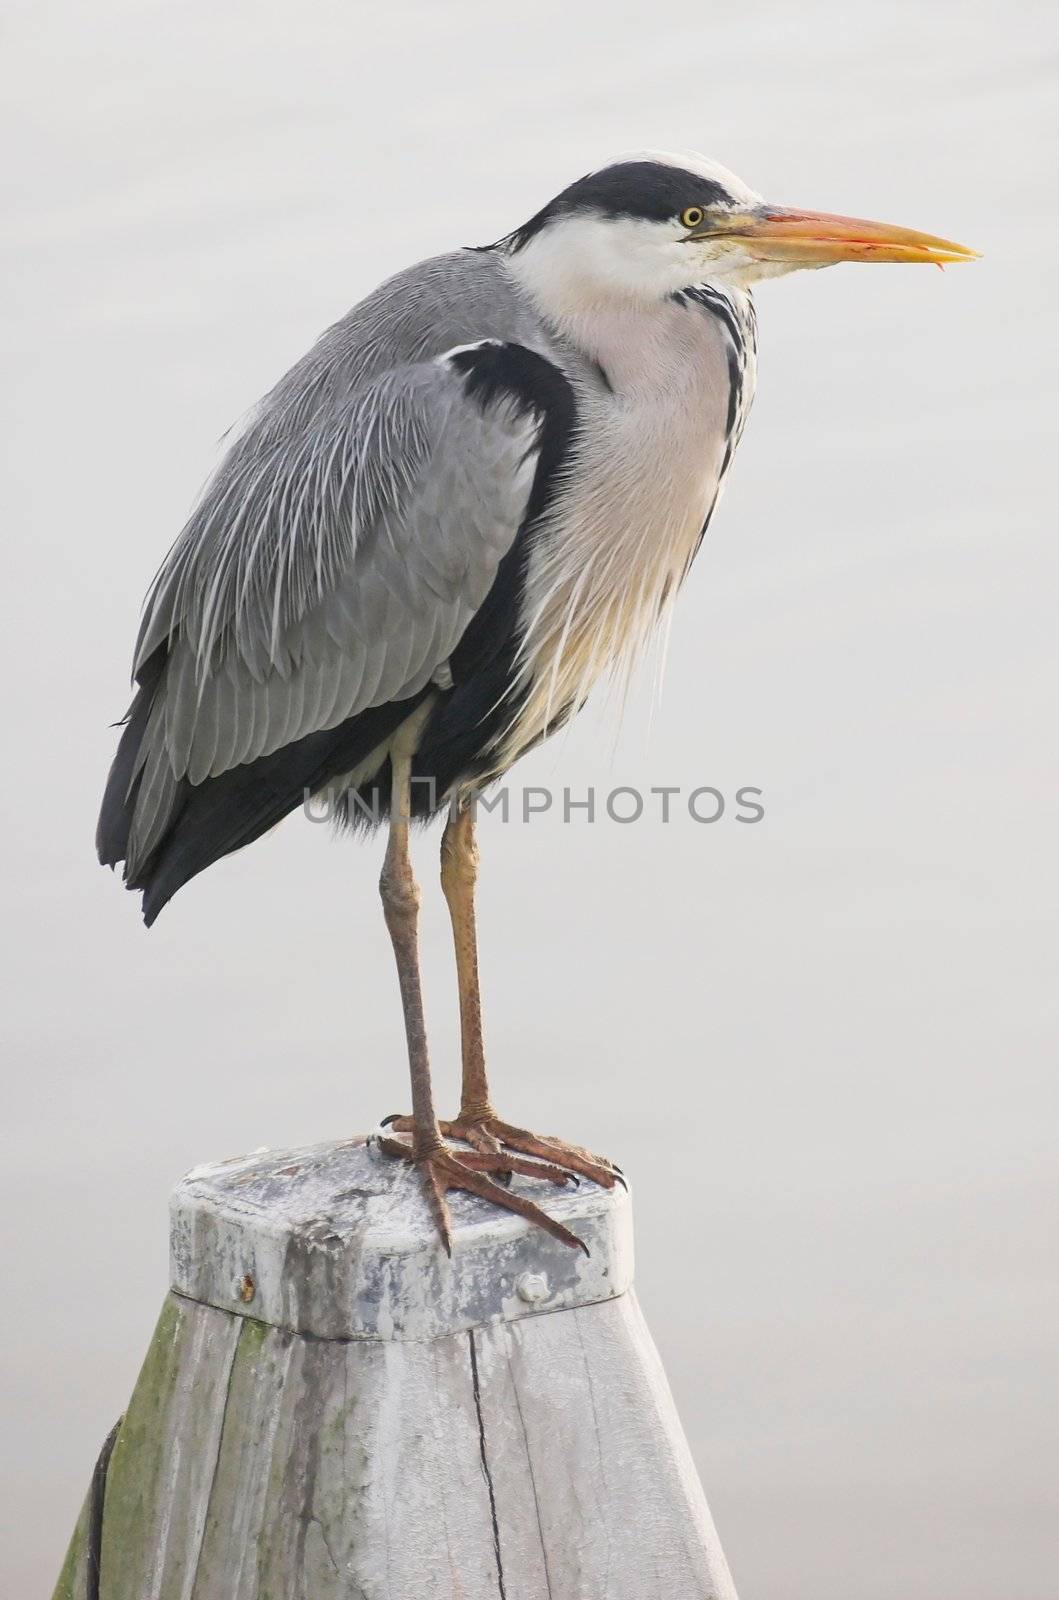 Grey heron standing on a wooden pole at the edge of a canal